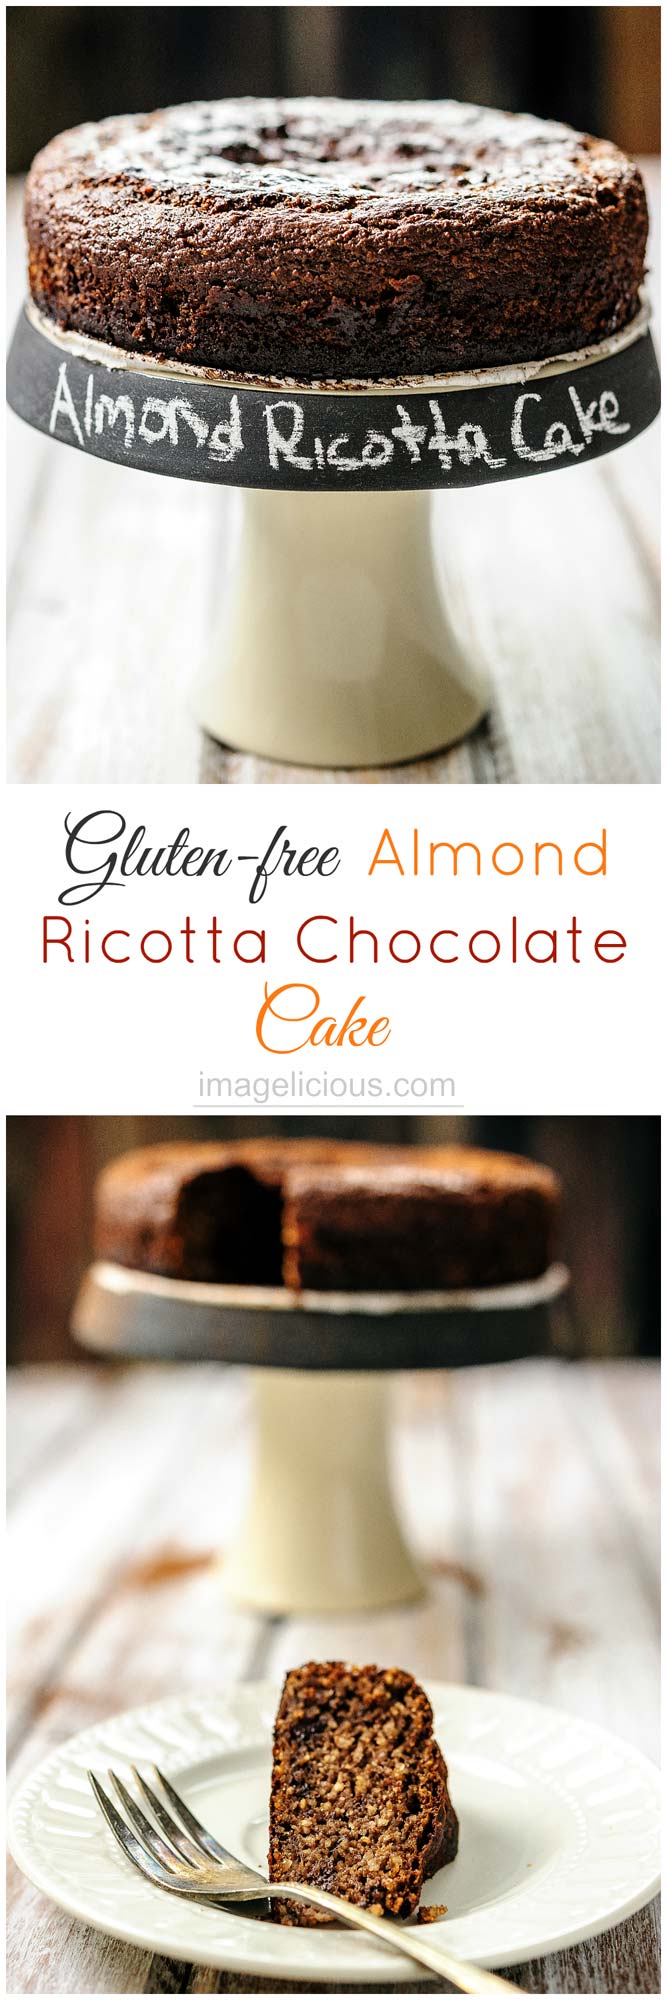 This delicious Gluten-free Almond Ricotta Chocolate Cake is perfect for a Valentine's Day dinner. It's moist, dense, flavourful, and healthy. It's filled with healthy ricotta and almonds, has very little sugar and no oil or butter | Imagelicious